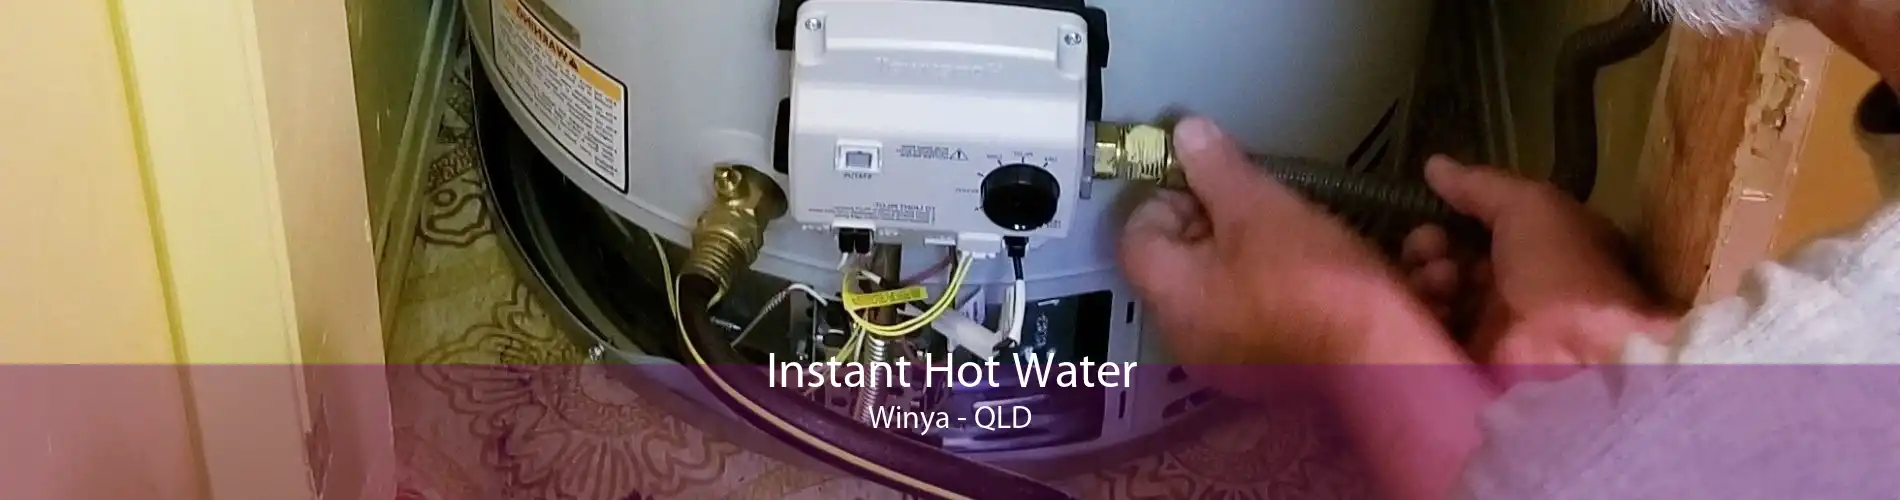 Instant Hot Water Winya - QLD